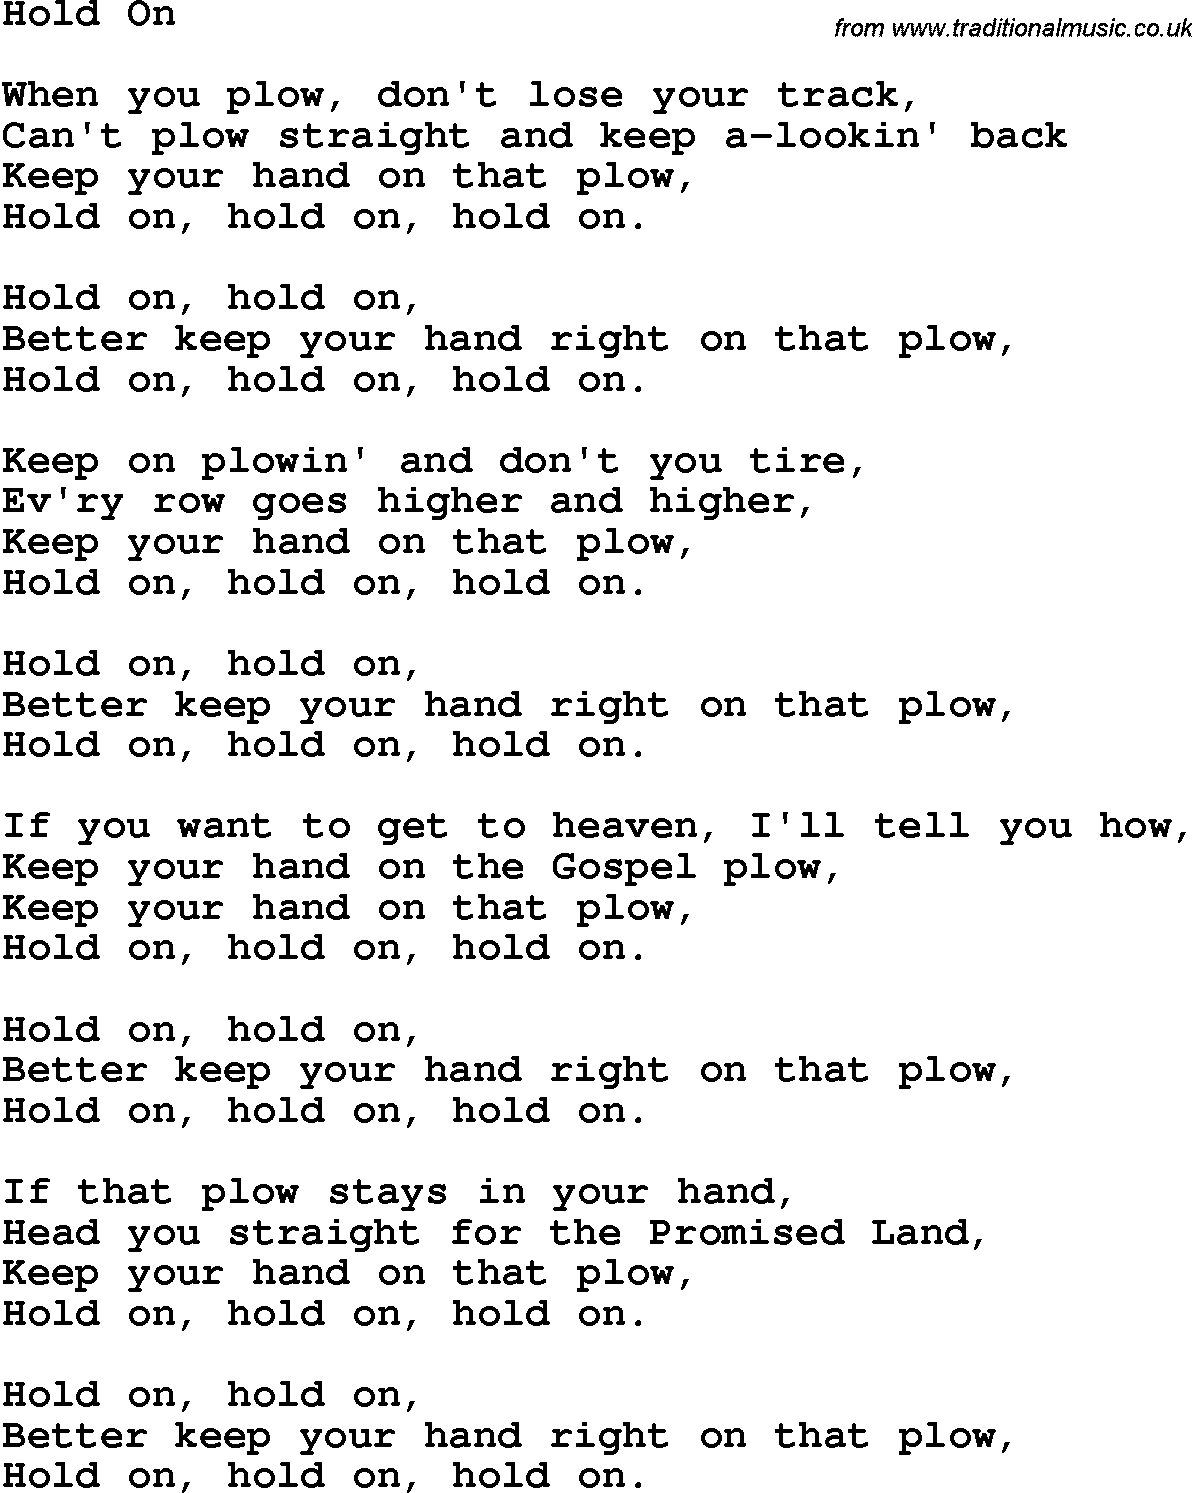 Christian Childrens Song Hold On Lyrics Lyrics to gospel plow by bob dylan: traditional music library